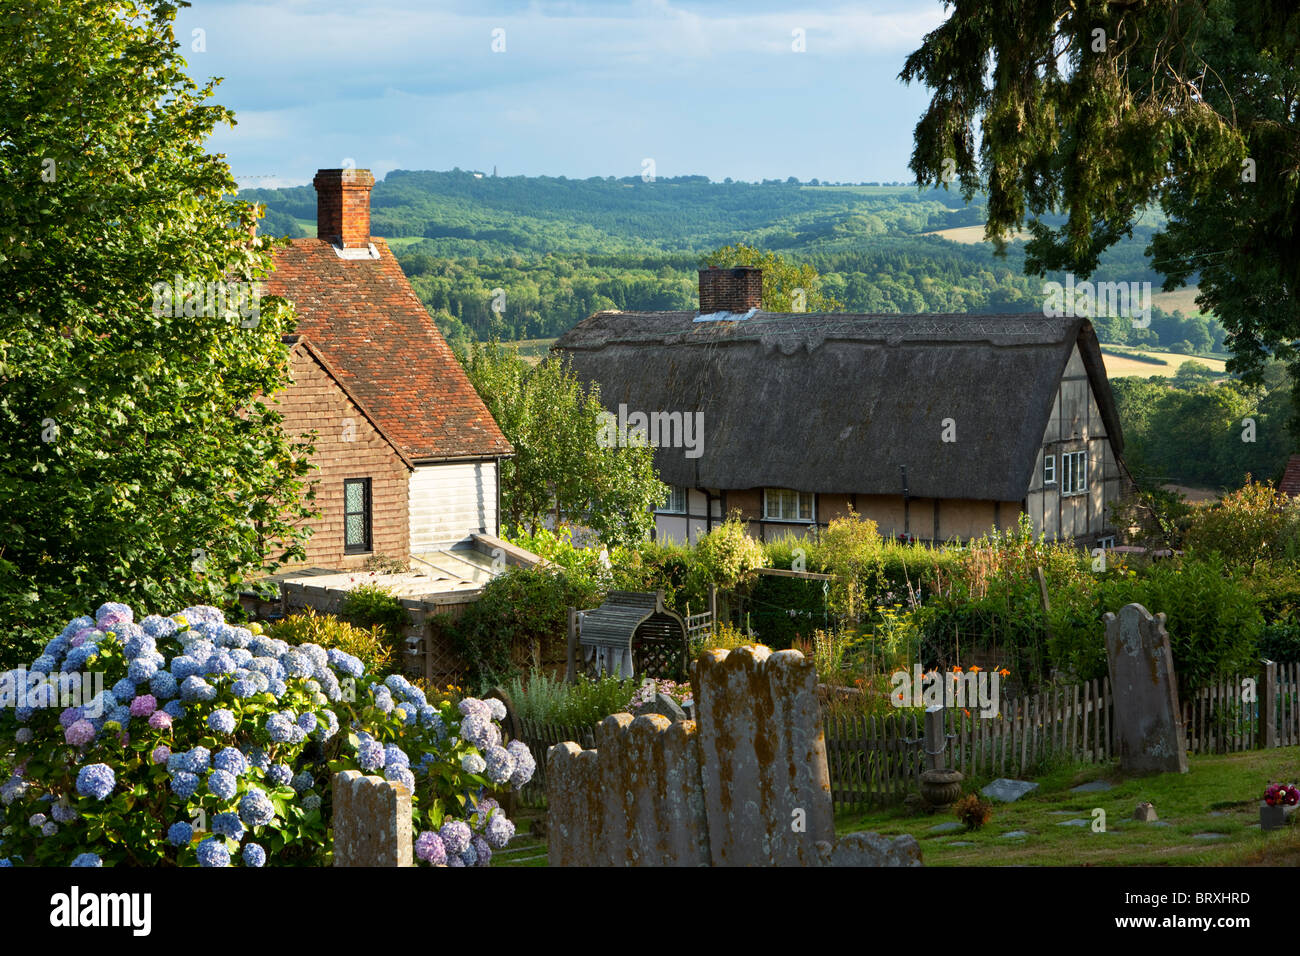 View over traditional Sussex cottages to Brightling and High Weald landscape Stock Photo